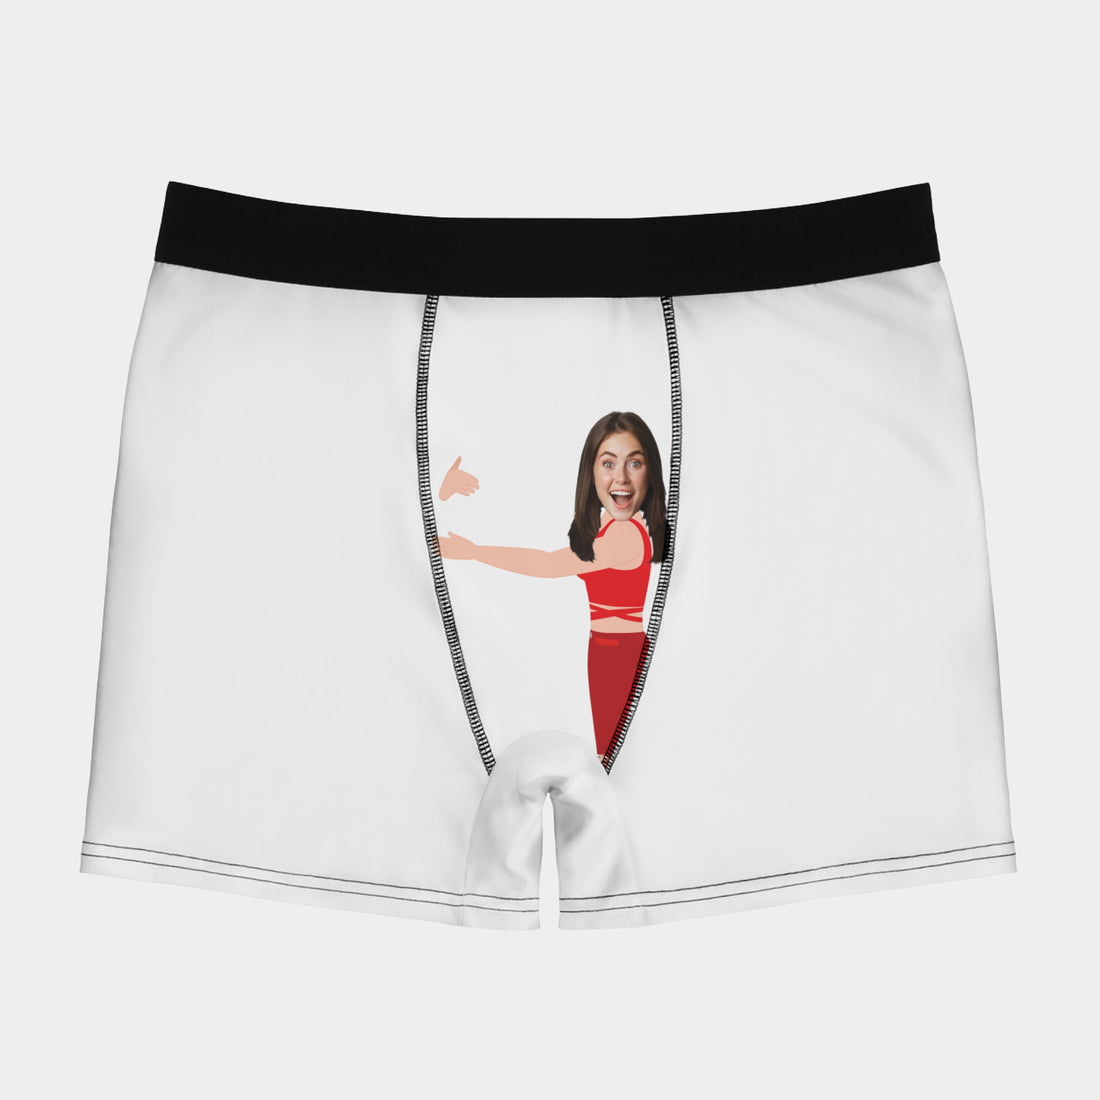 Spicy Personalized Boxers For Men With Face